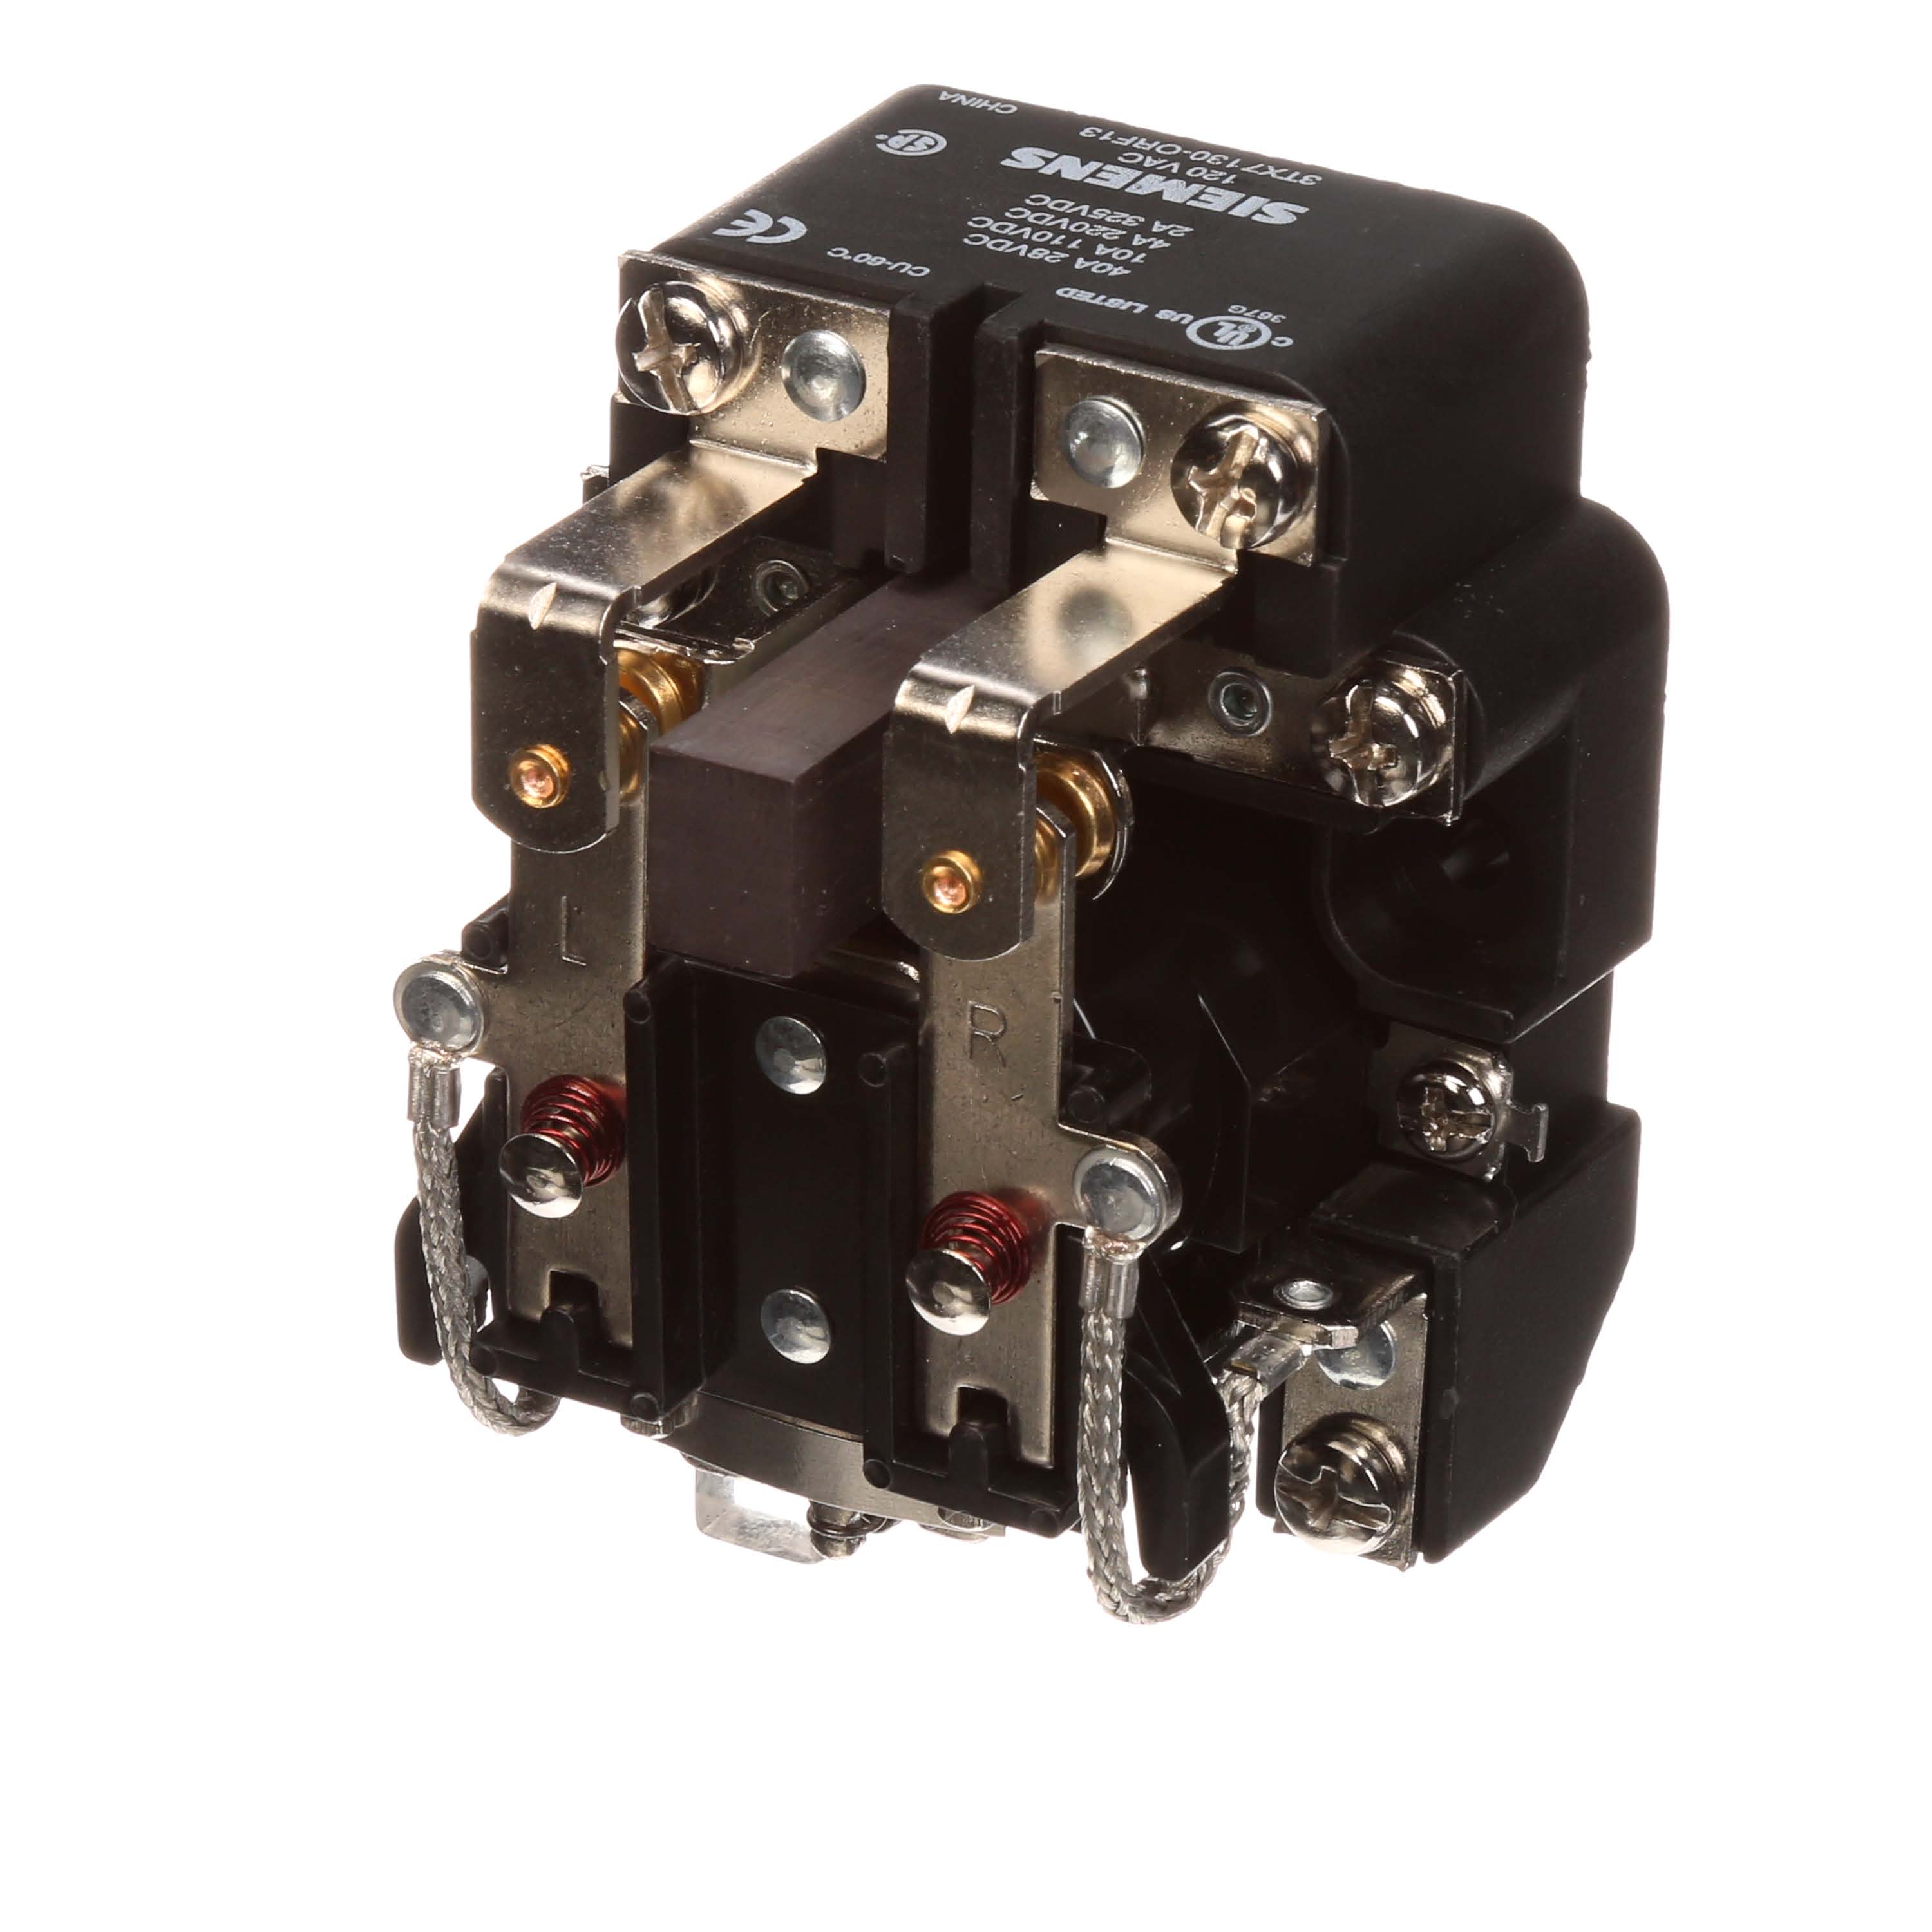 Open Power Relay Heavy Duty DPDT, Mag Blowout 40A, 120VAC Optional Metal Cover 3TX7144-1M0